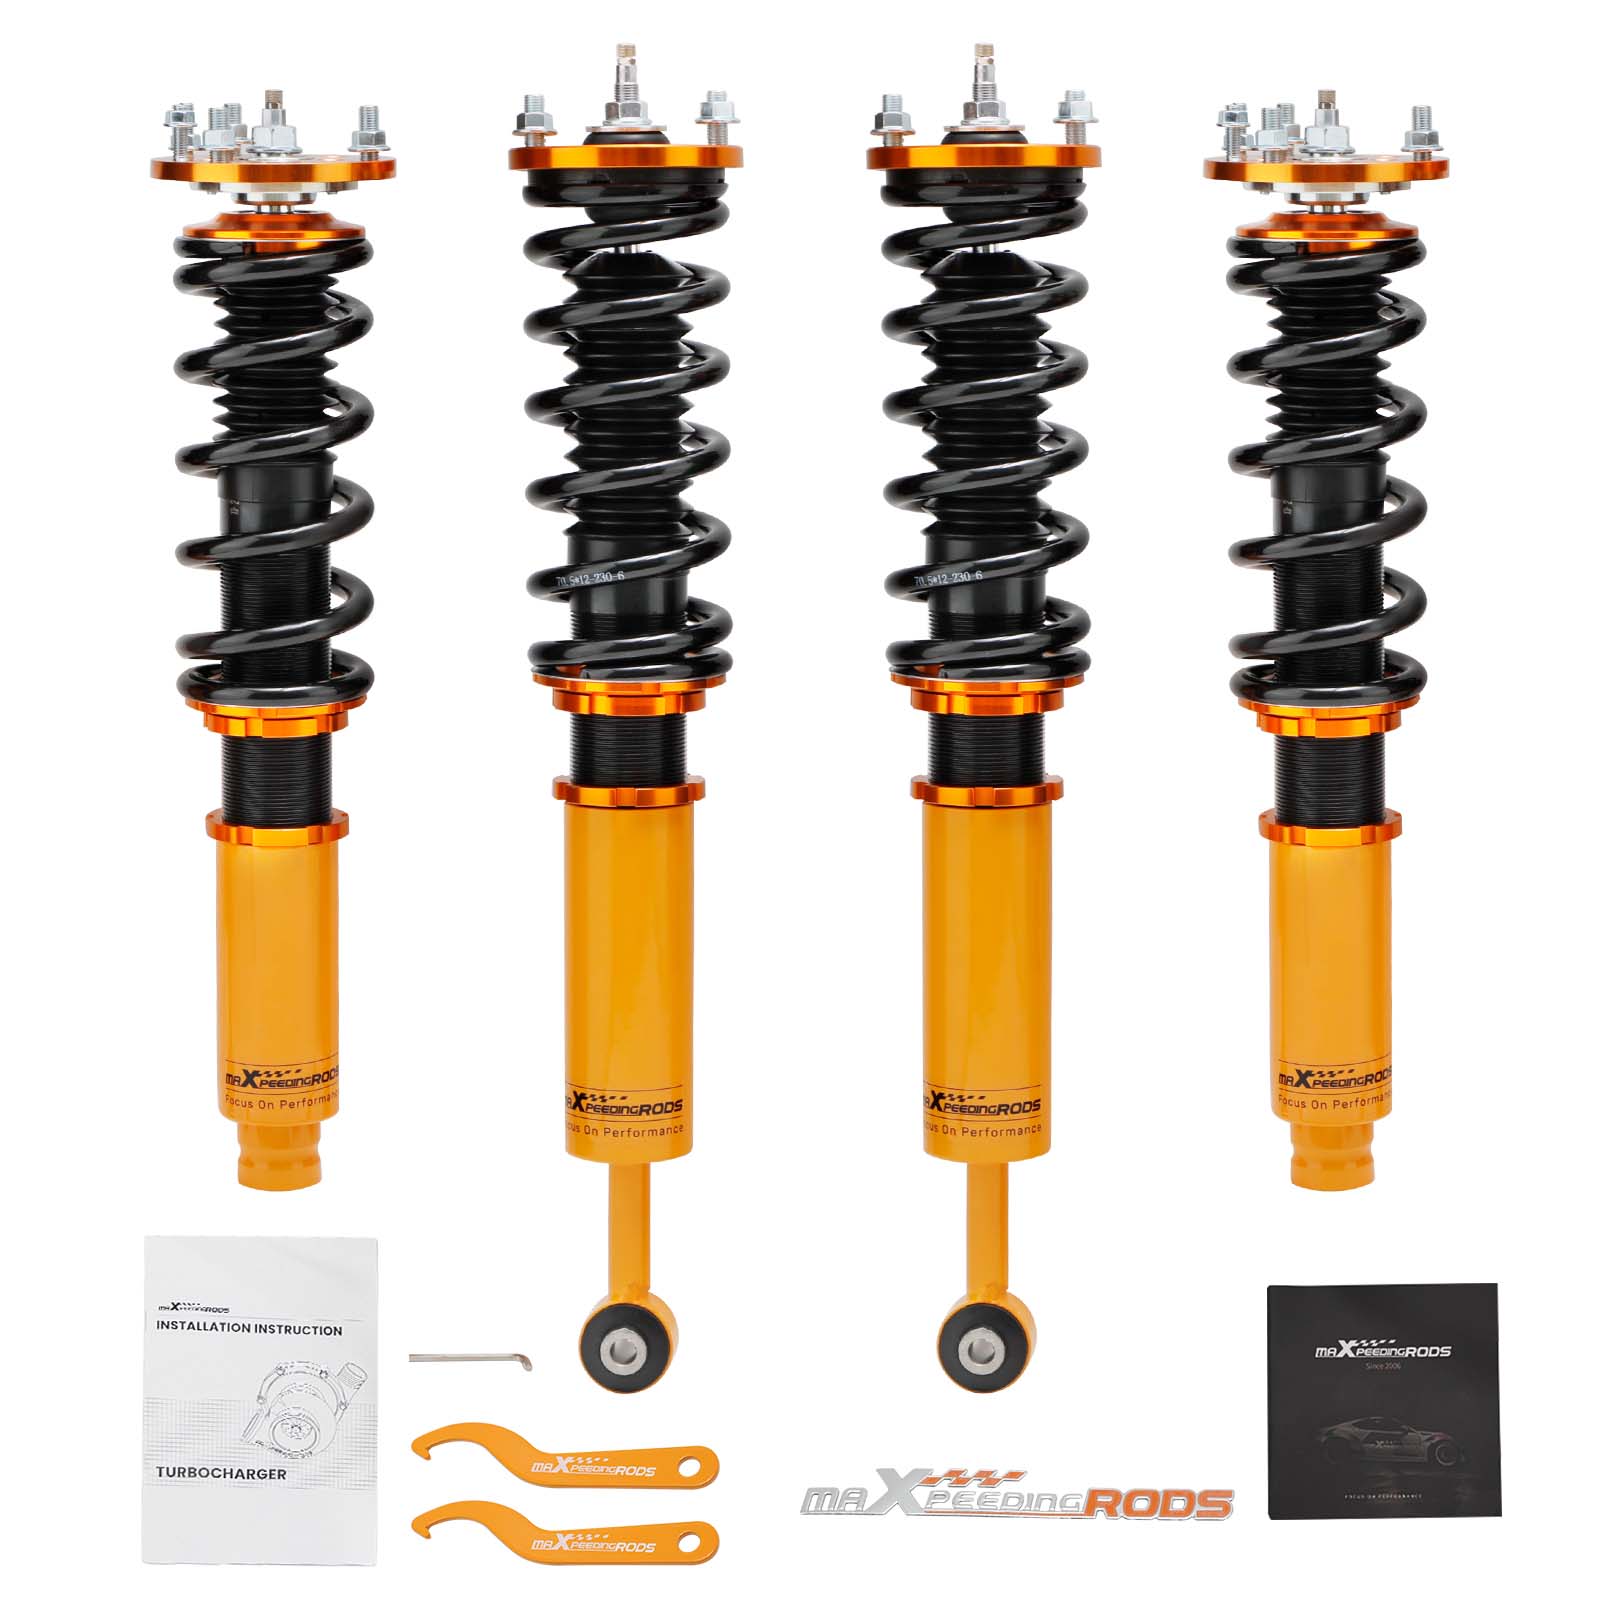 24 Damping Level Coilover For Honda Accord CL7 CL9 2003-2008 Acura TSX 2004-2008